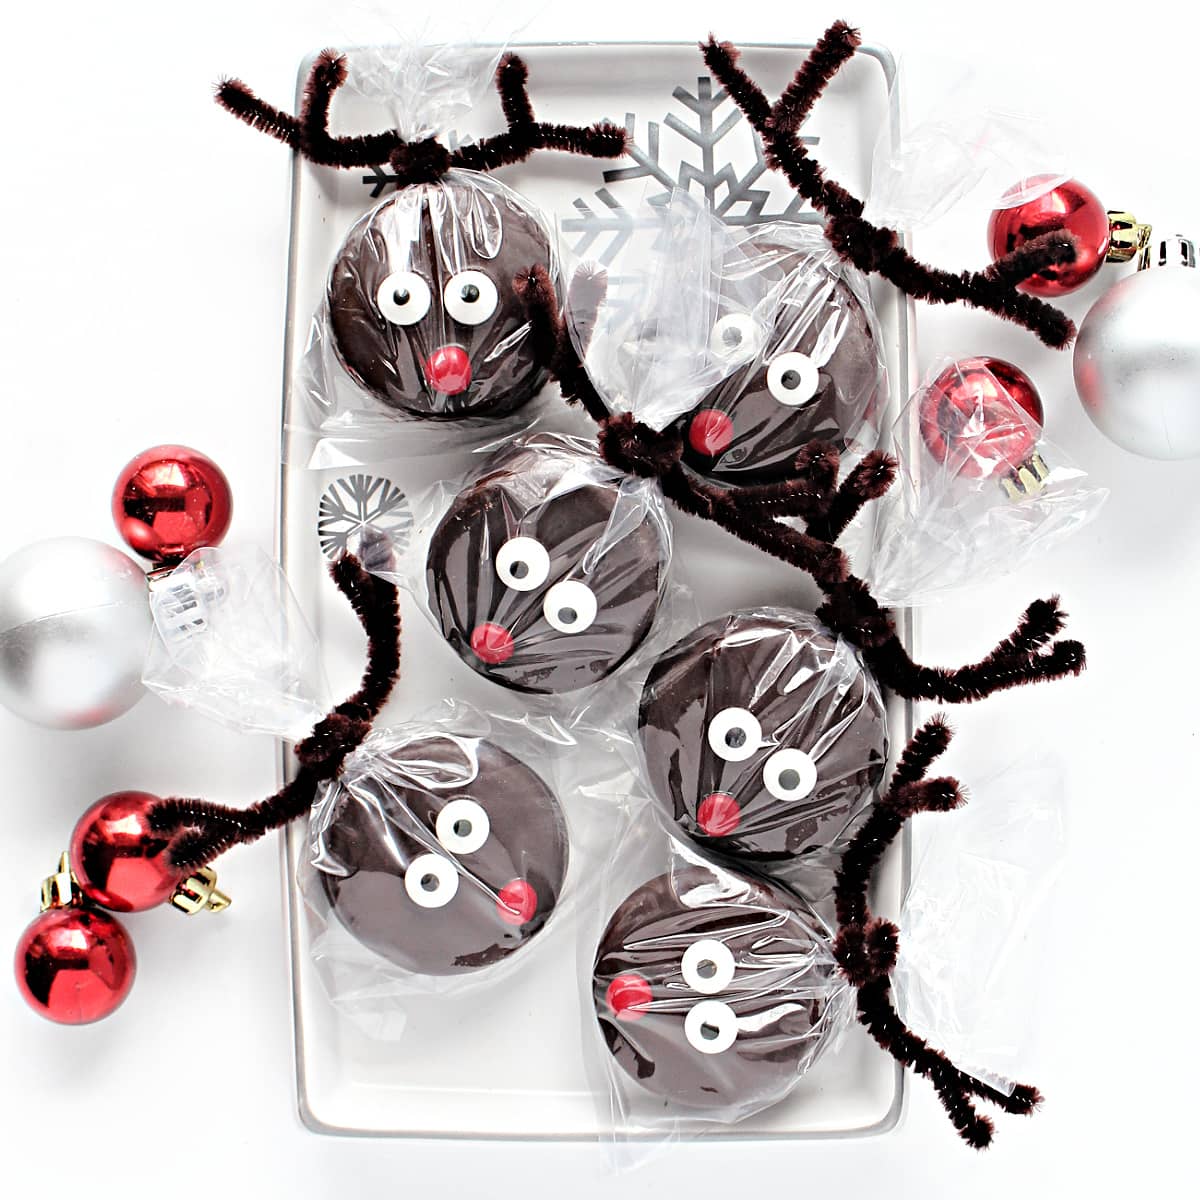 Reindeer Oreos with pipe cleaner antlers on a platter.